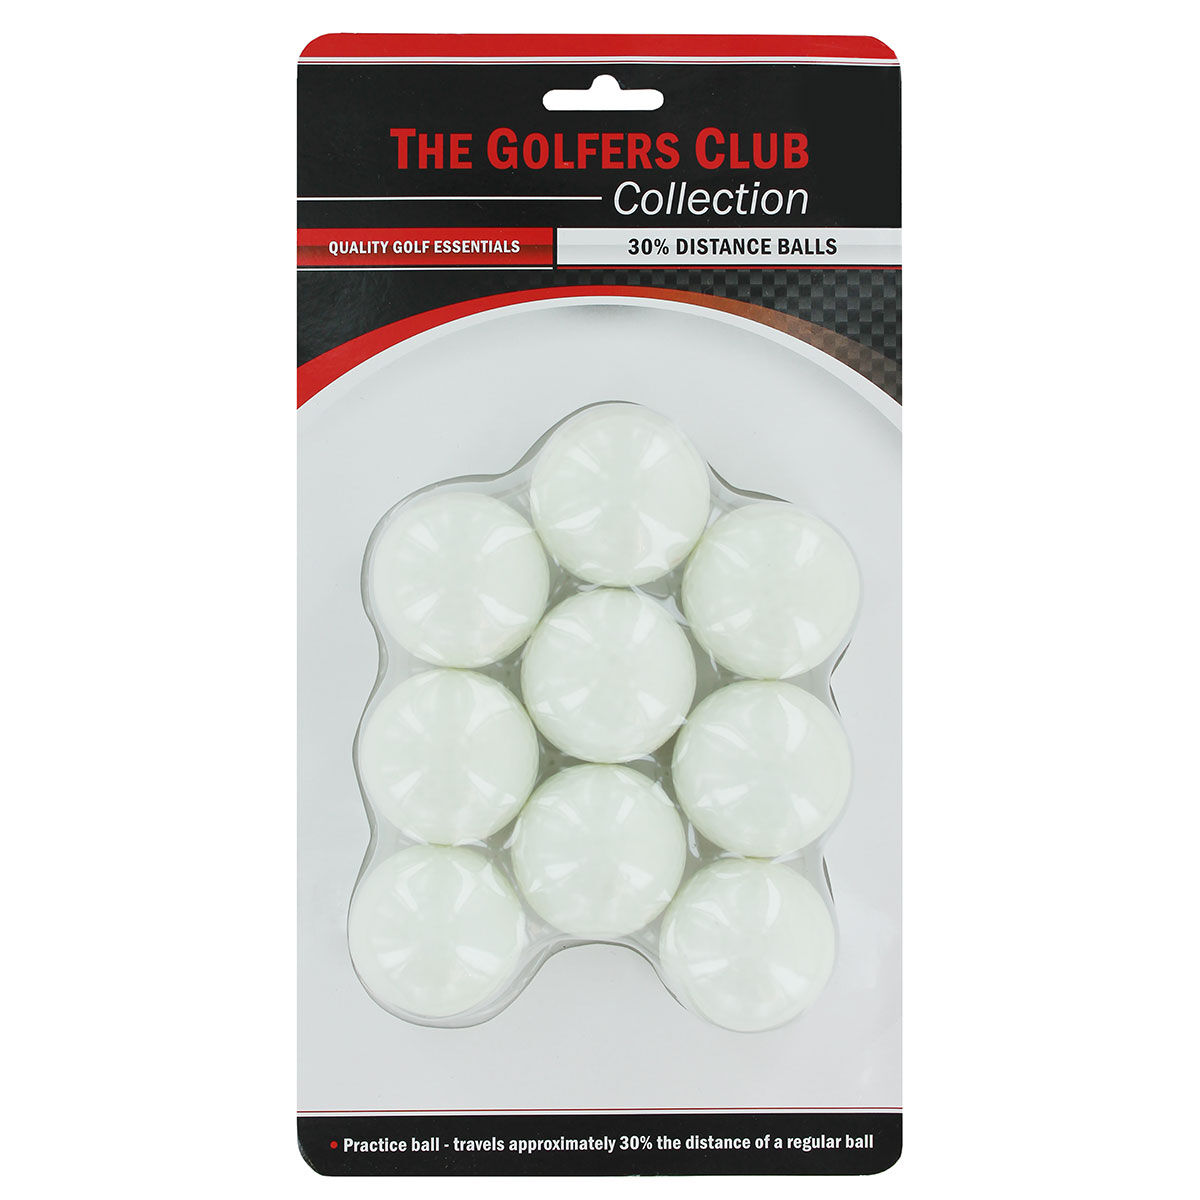 The Golfers Club 30% Distance 9 Golf Ball Pack, Mens, White, One Size | American Golf von The Golfers Club